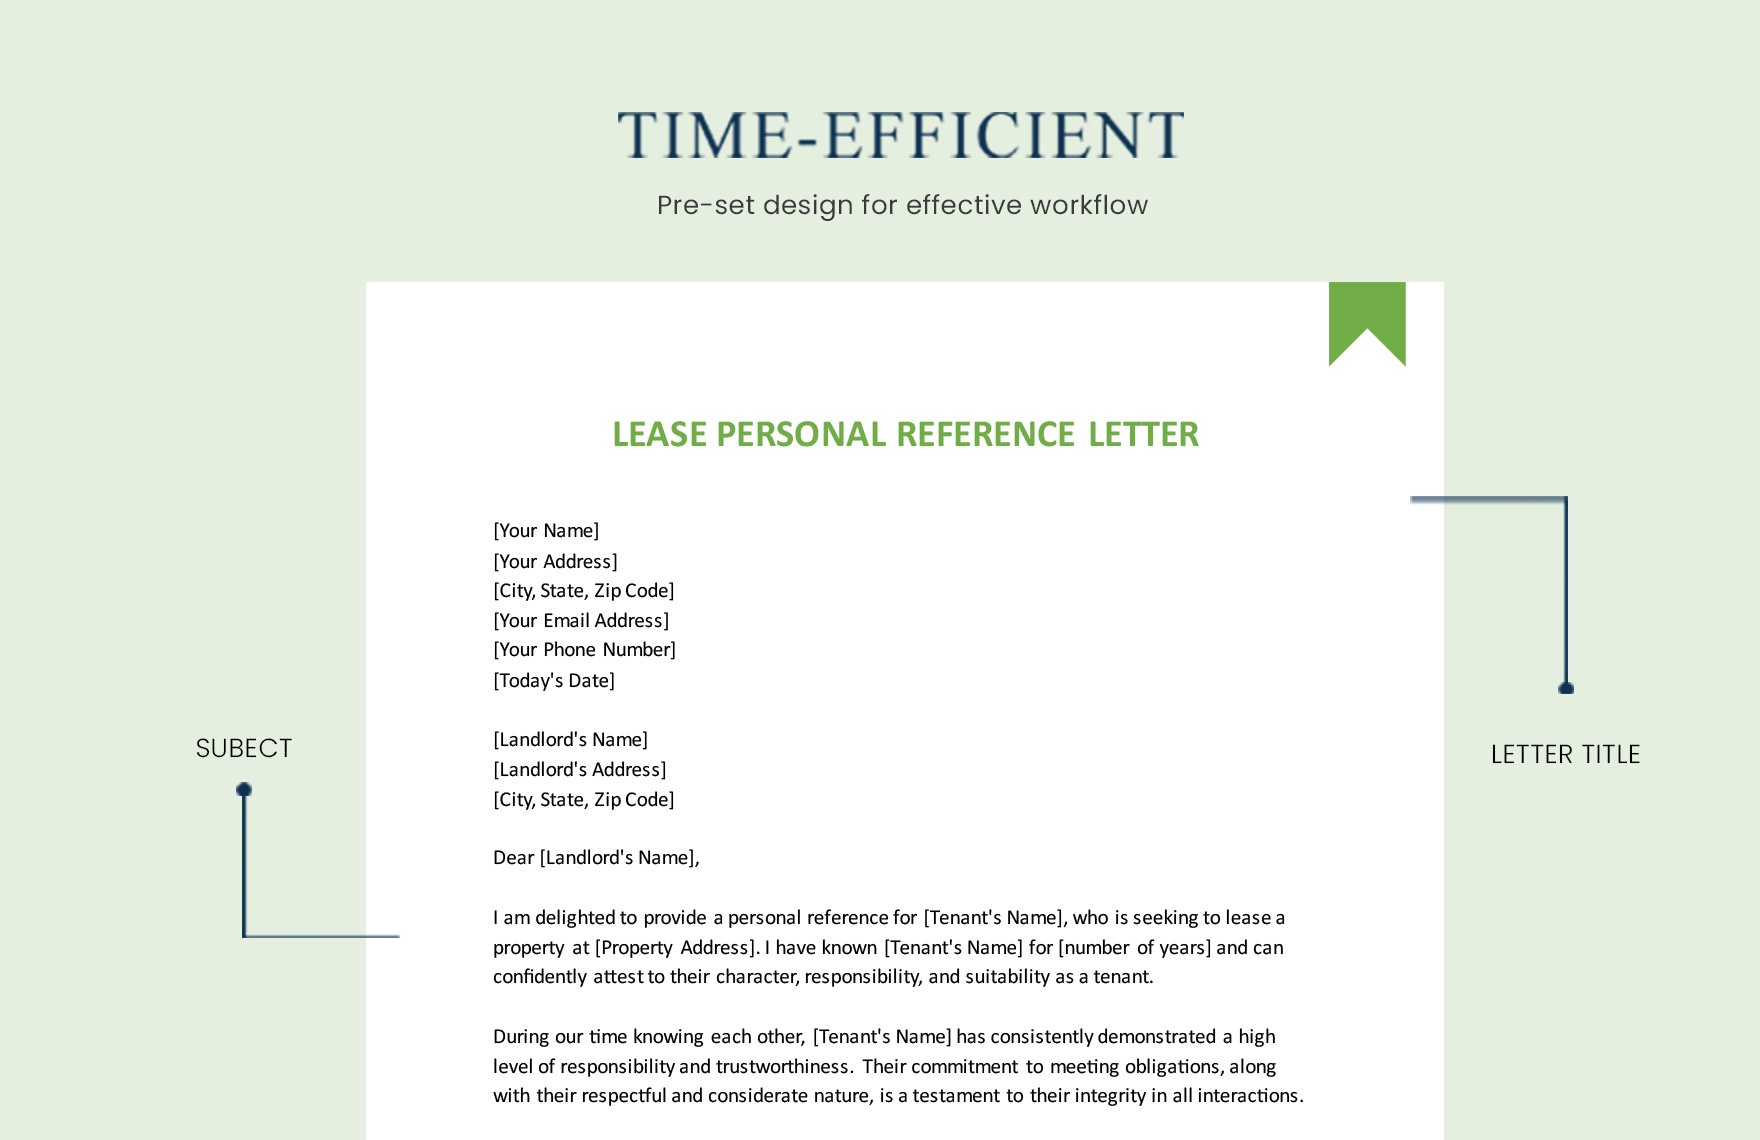 Lease Personal Reference Letter